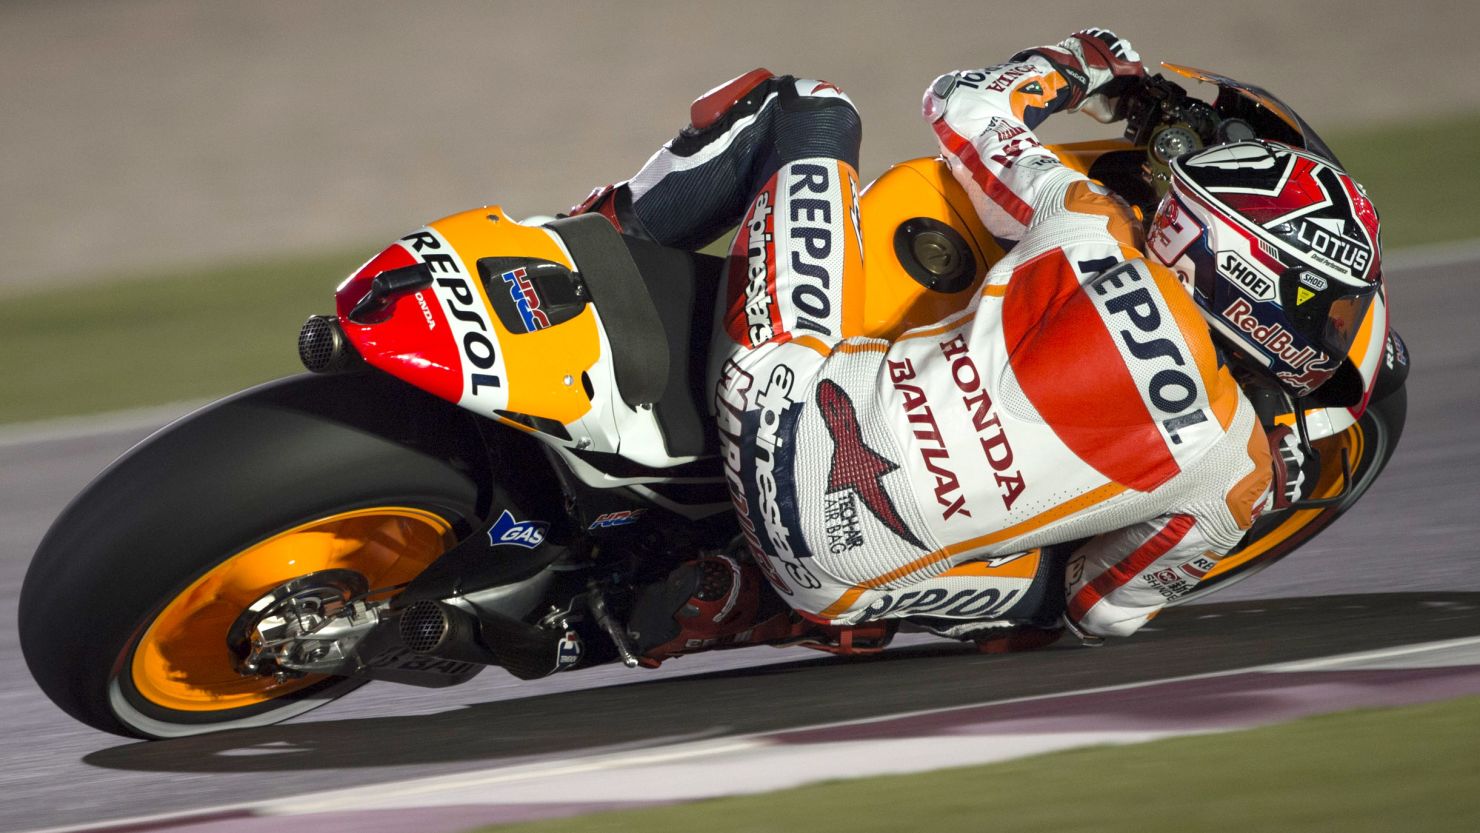 MotoGP rookie Marc Marquez was a surprise name at the top of the practice timesheets at Losail in Doha, Qatar.